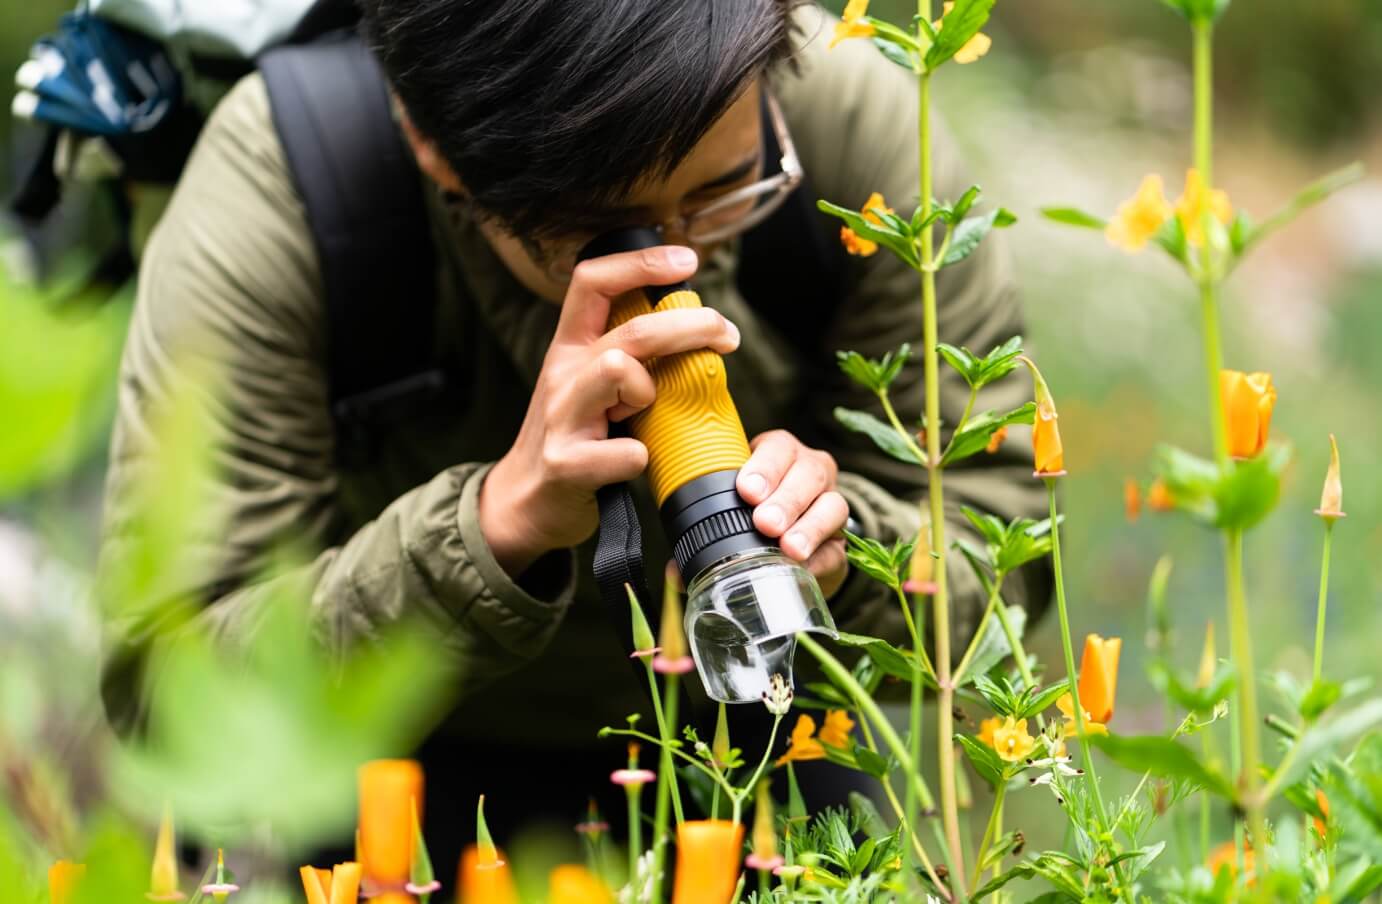 Mary Tolosa looking through a monocular into some plantlife